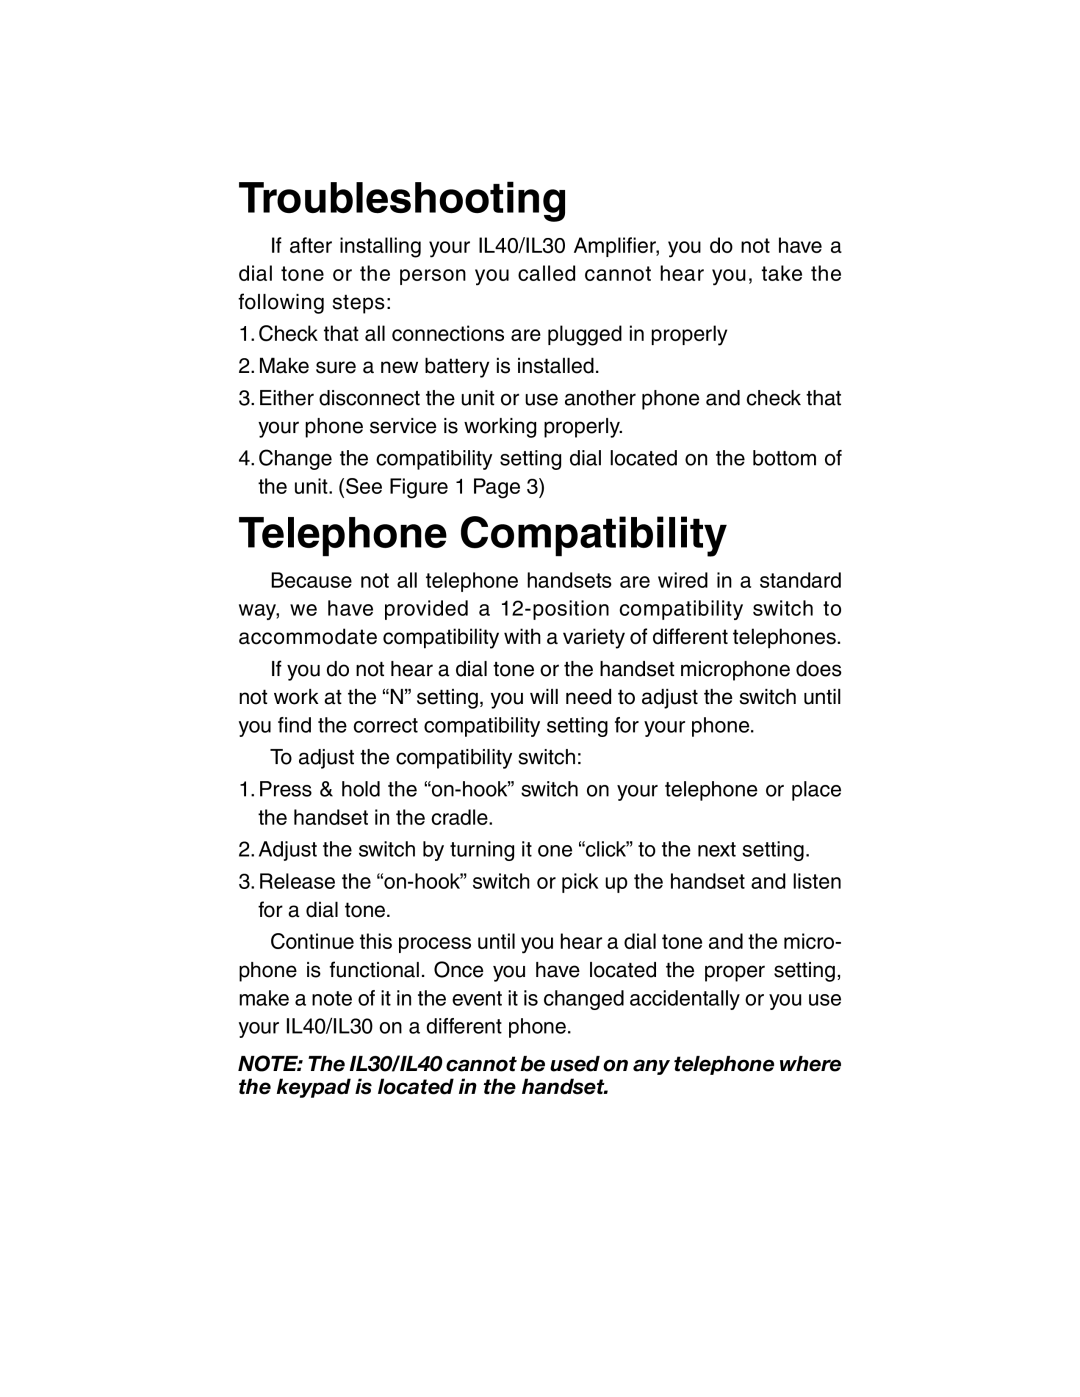 ClearSounds Portable Telephone Amplifier manual Troubleshooting, Telephone Compatibility 